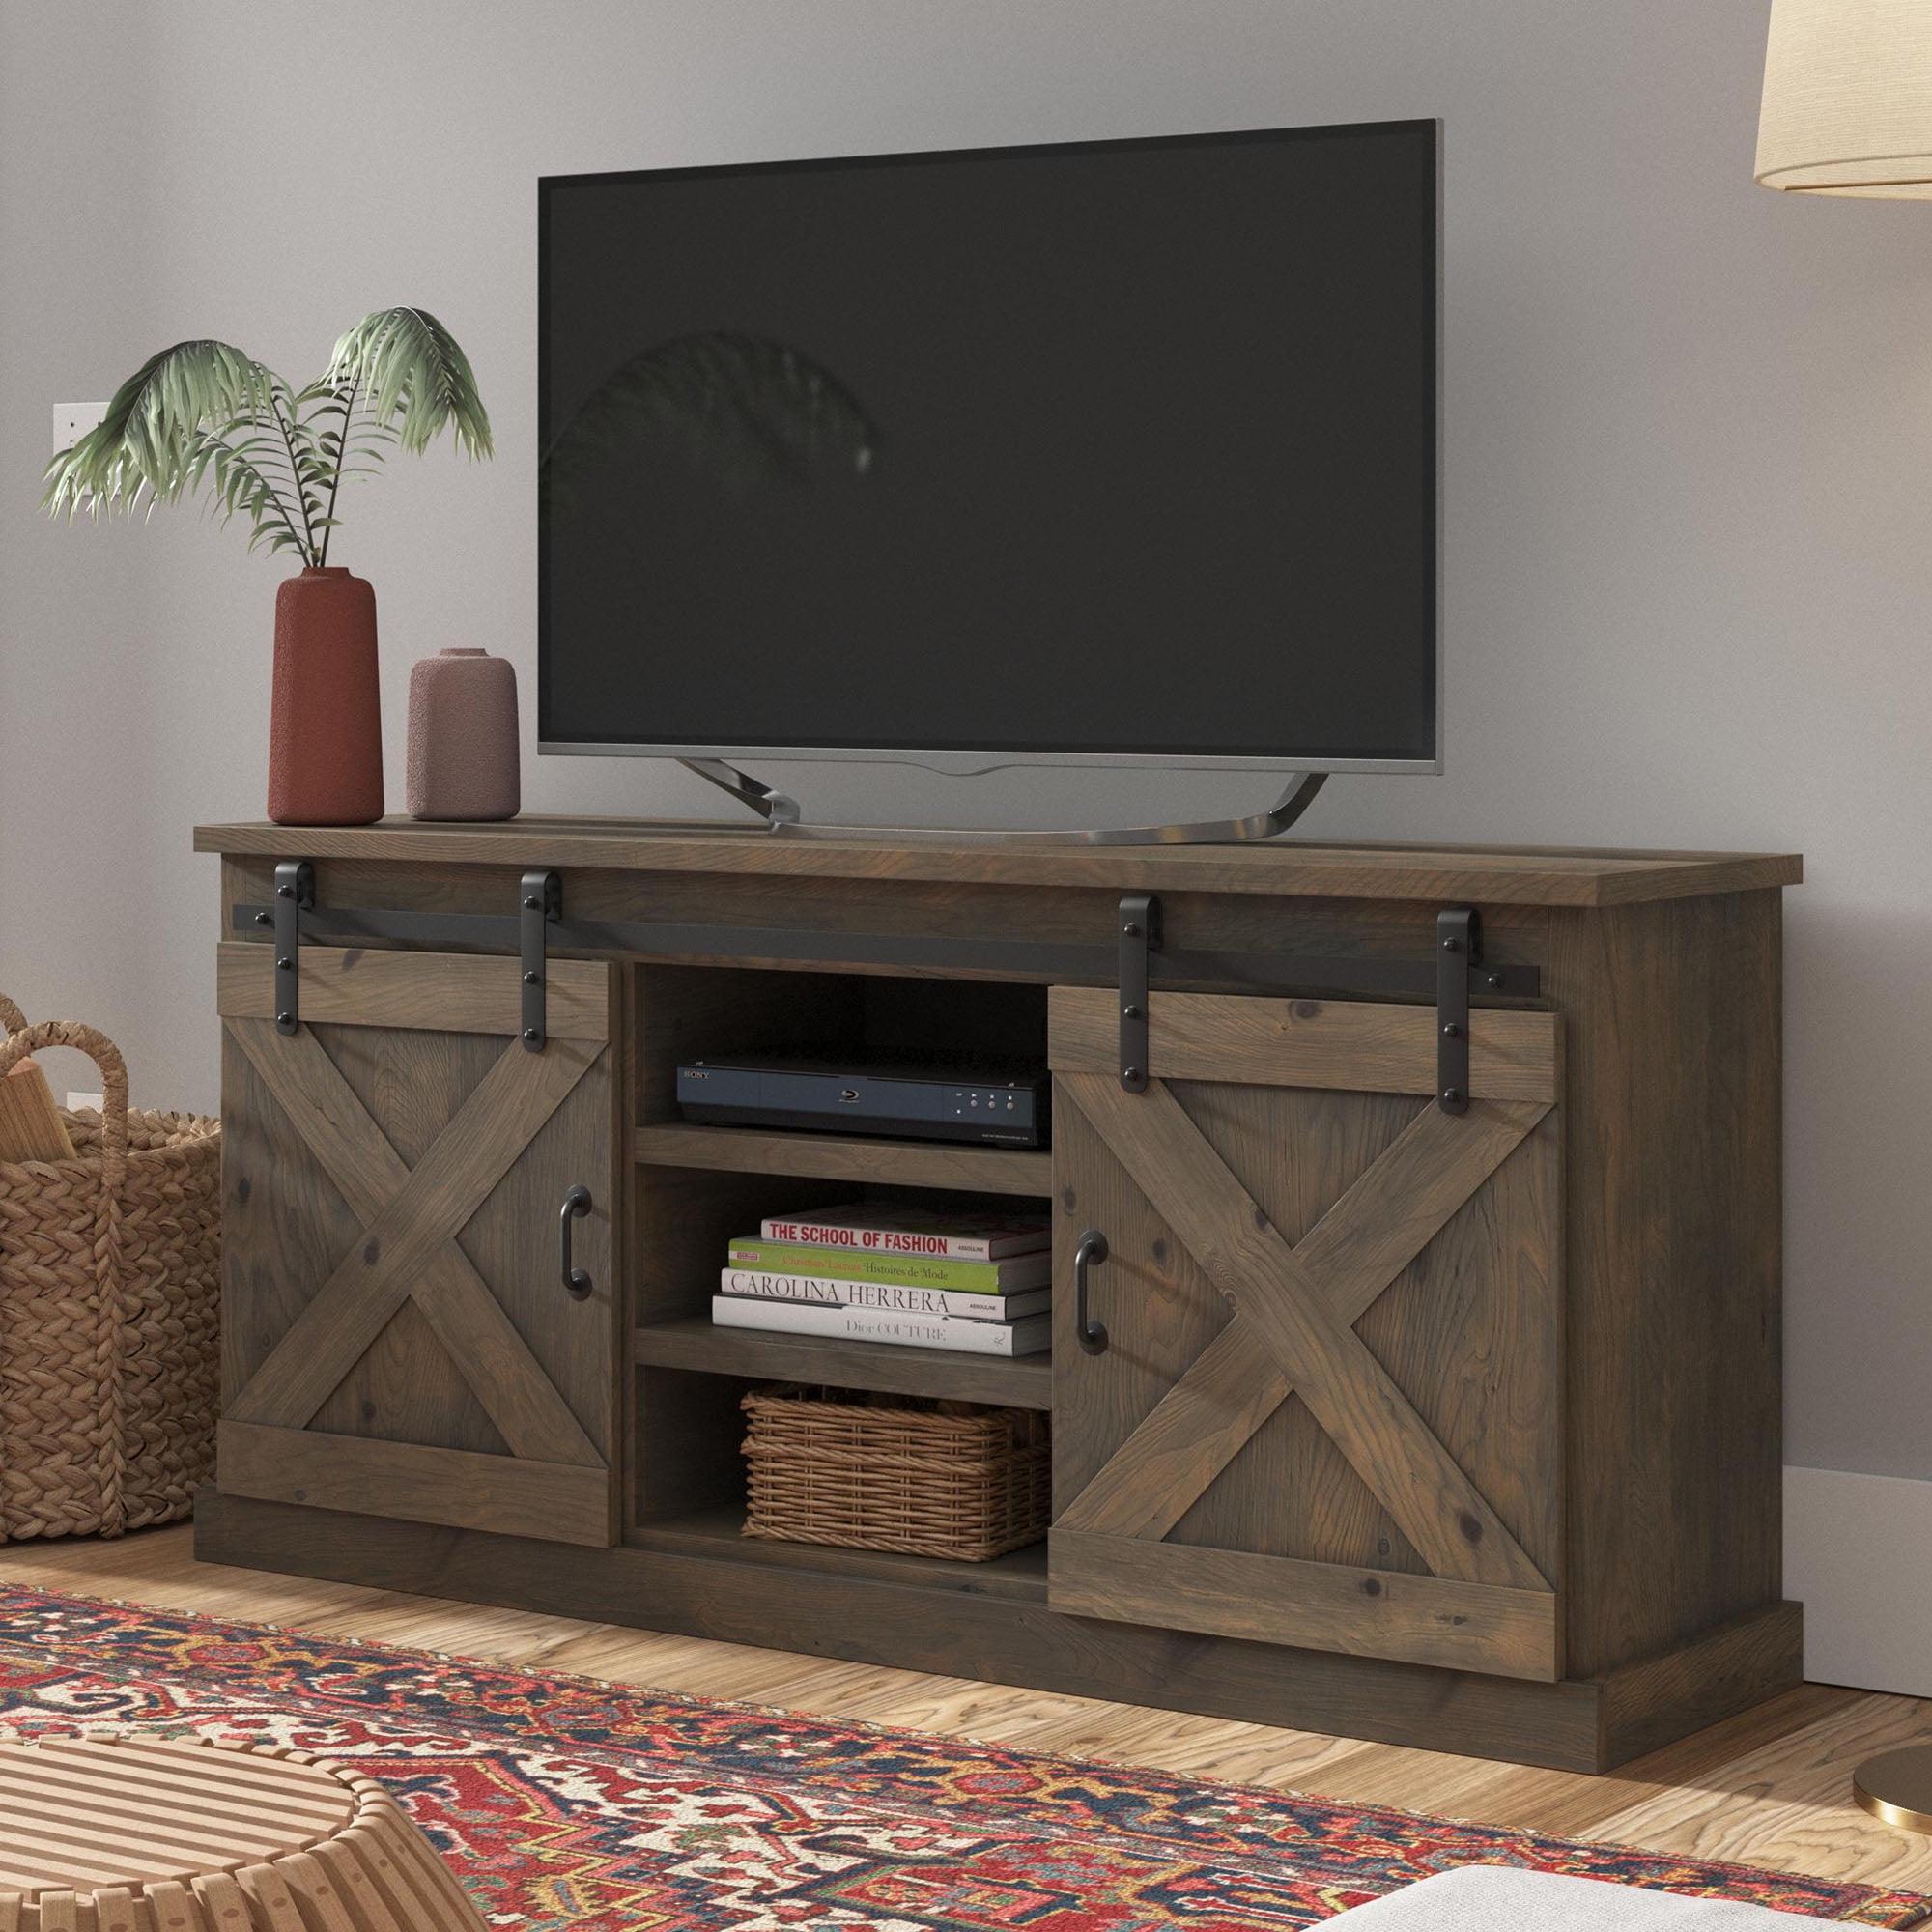 Transitional Barn Wood TV Stand with Sliding Cabinet Doors, 66"